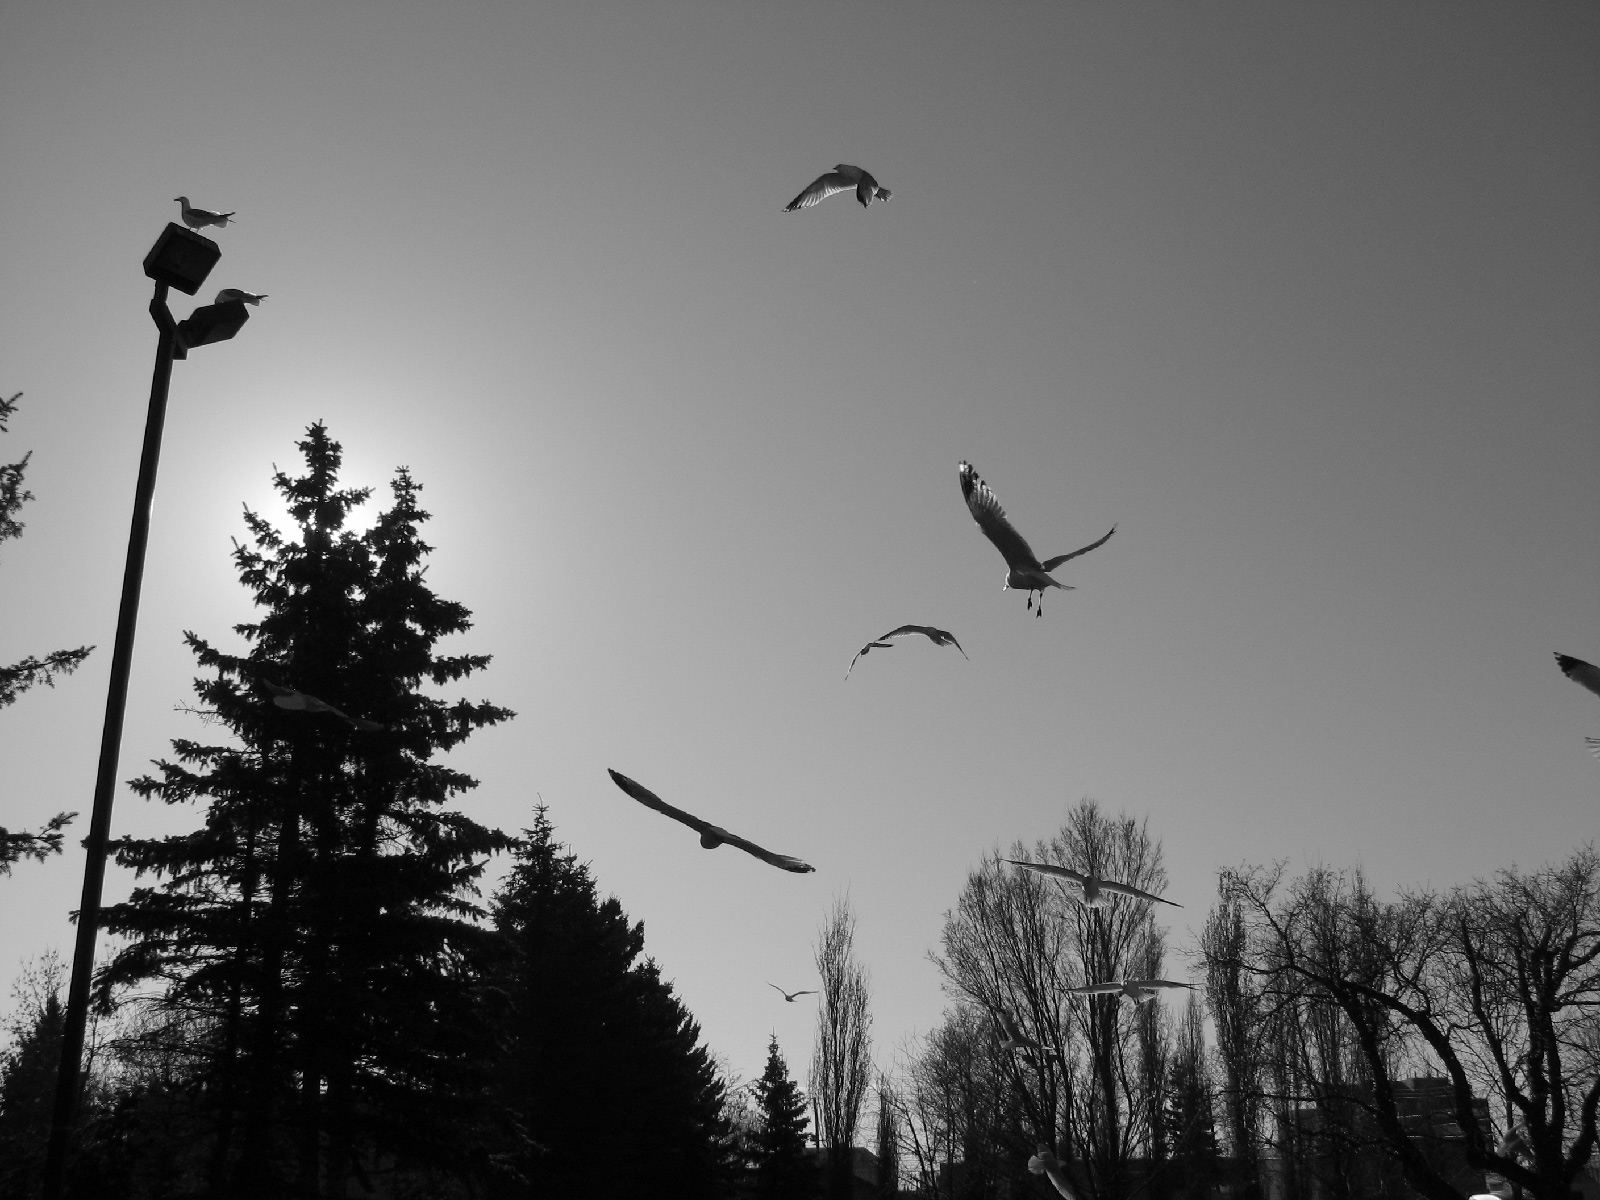 A photograph of seagulls in flight with a light post and trees in the background